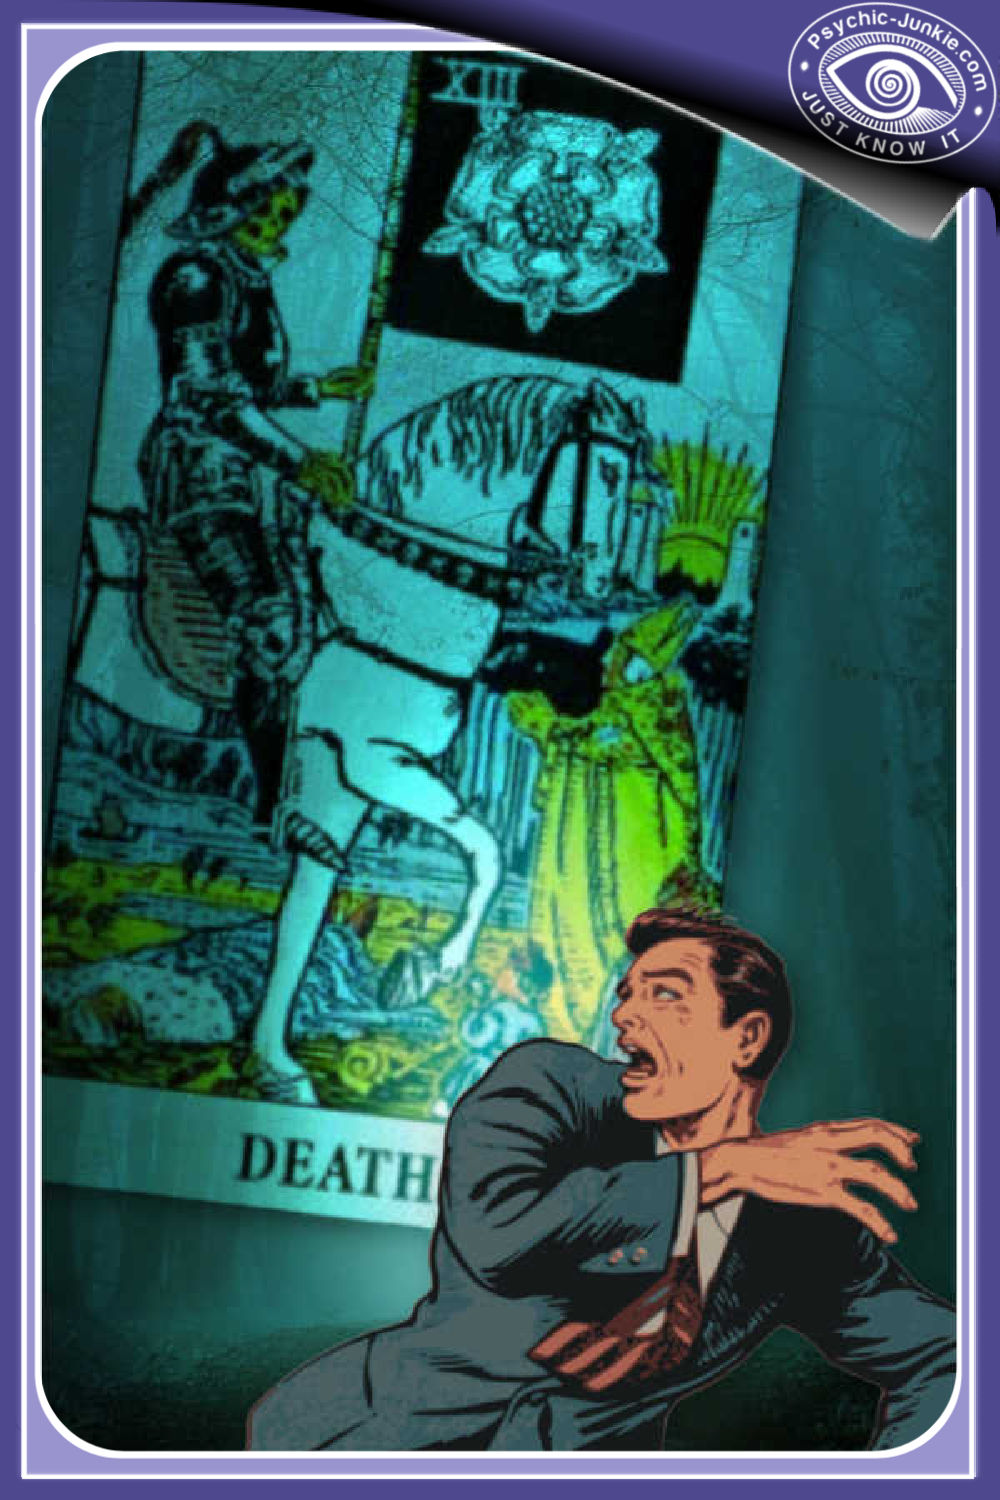 .What does the death tarot card represent?